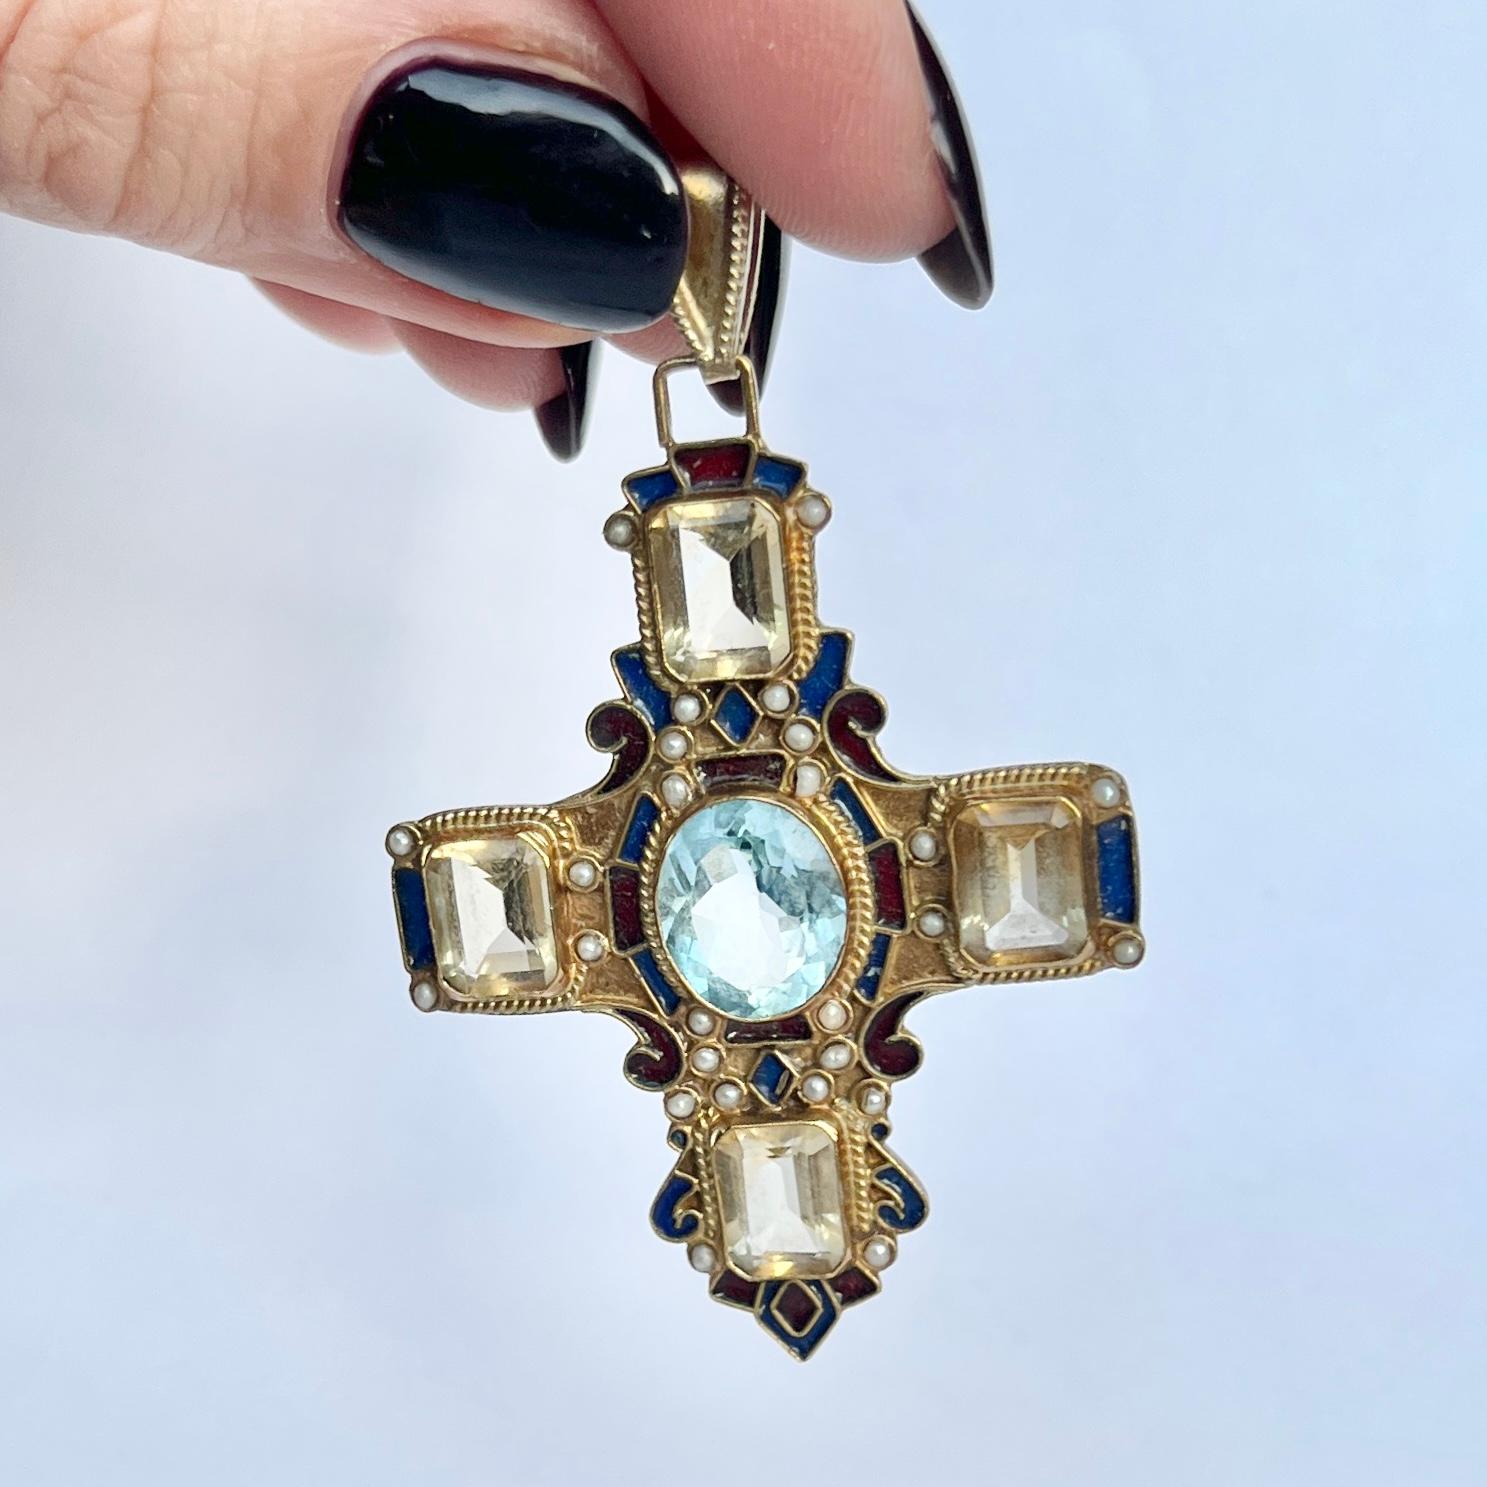 The stones in this lovely pendant are Citrine and the central stone and pale blue. There are also seed pearls set within the pinchbeck and enamel details. Pinchbeck is a metal used to mimic gold. 

Cross Dimensions (including loop): 35x58mm

Weight: